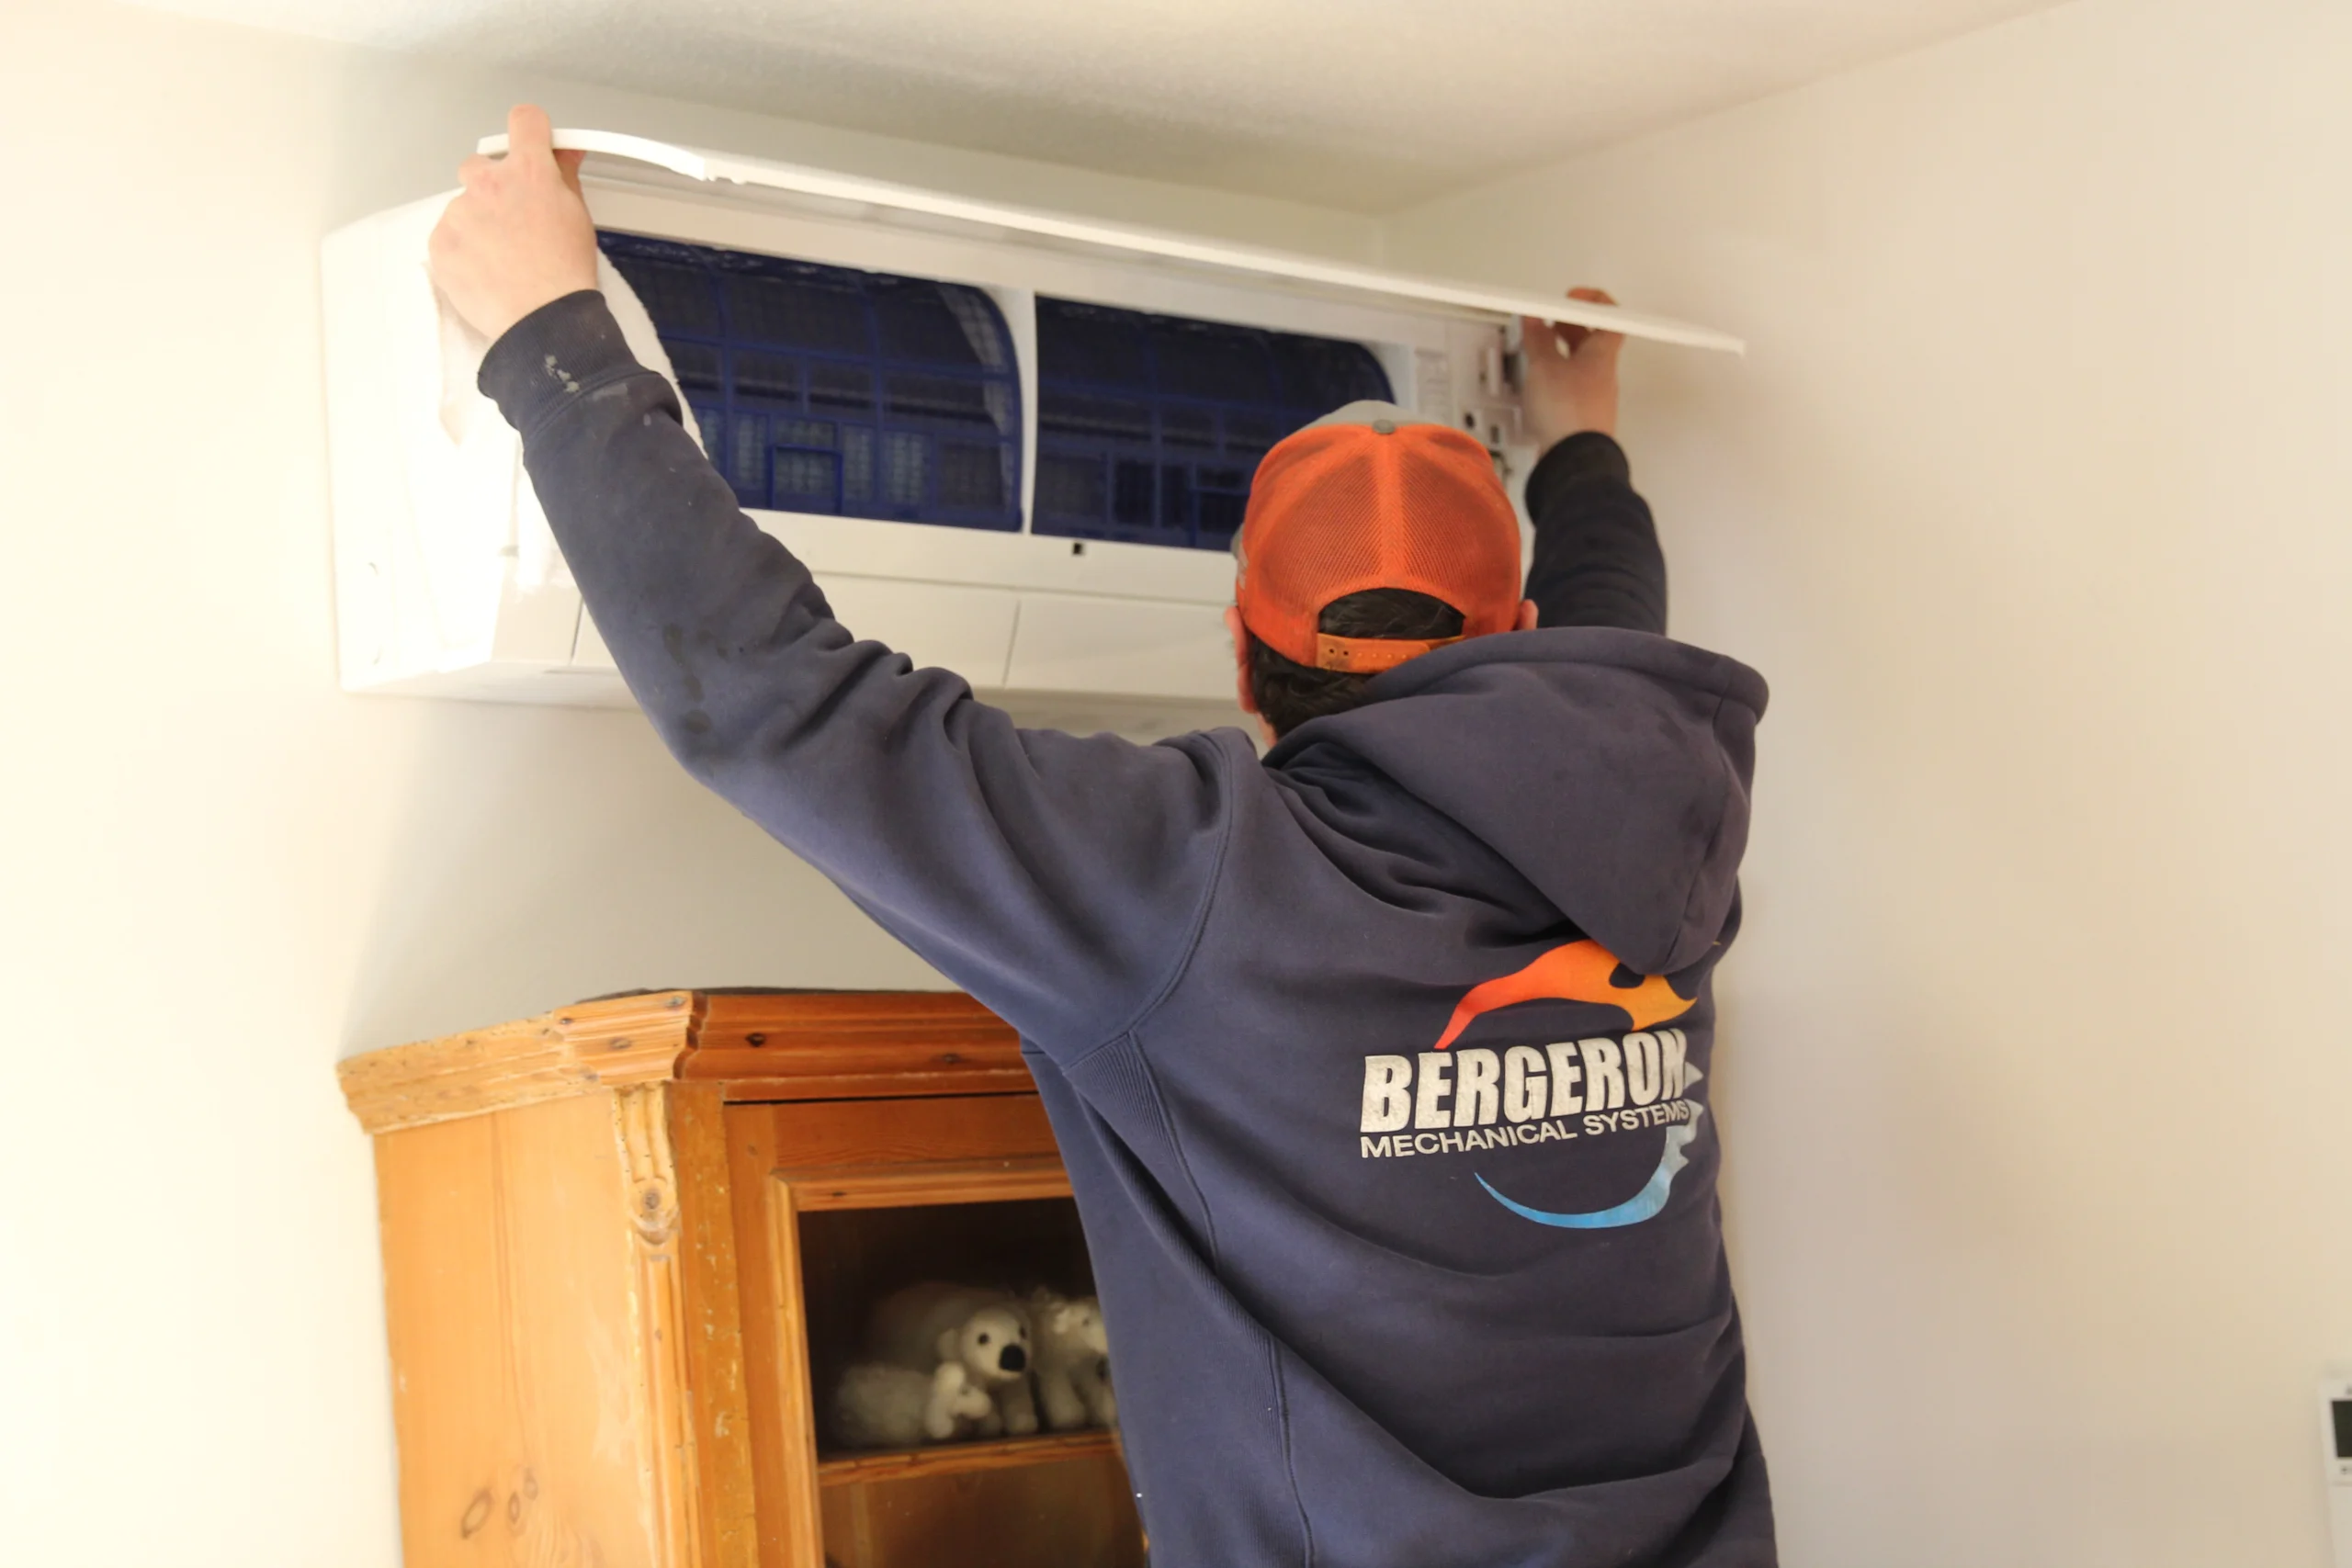 Air conditioning services in Keene, NH with Bergeron Mechanical Systems.